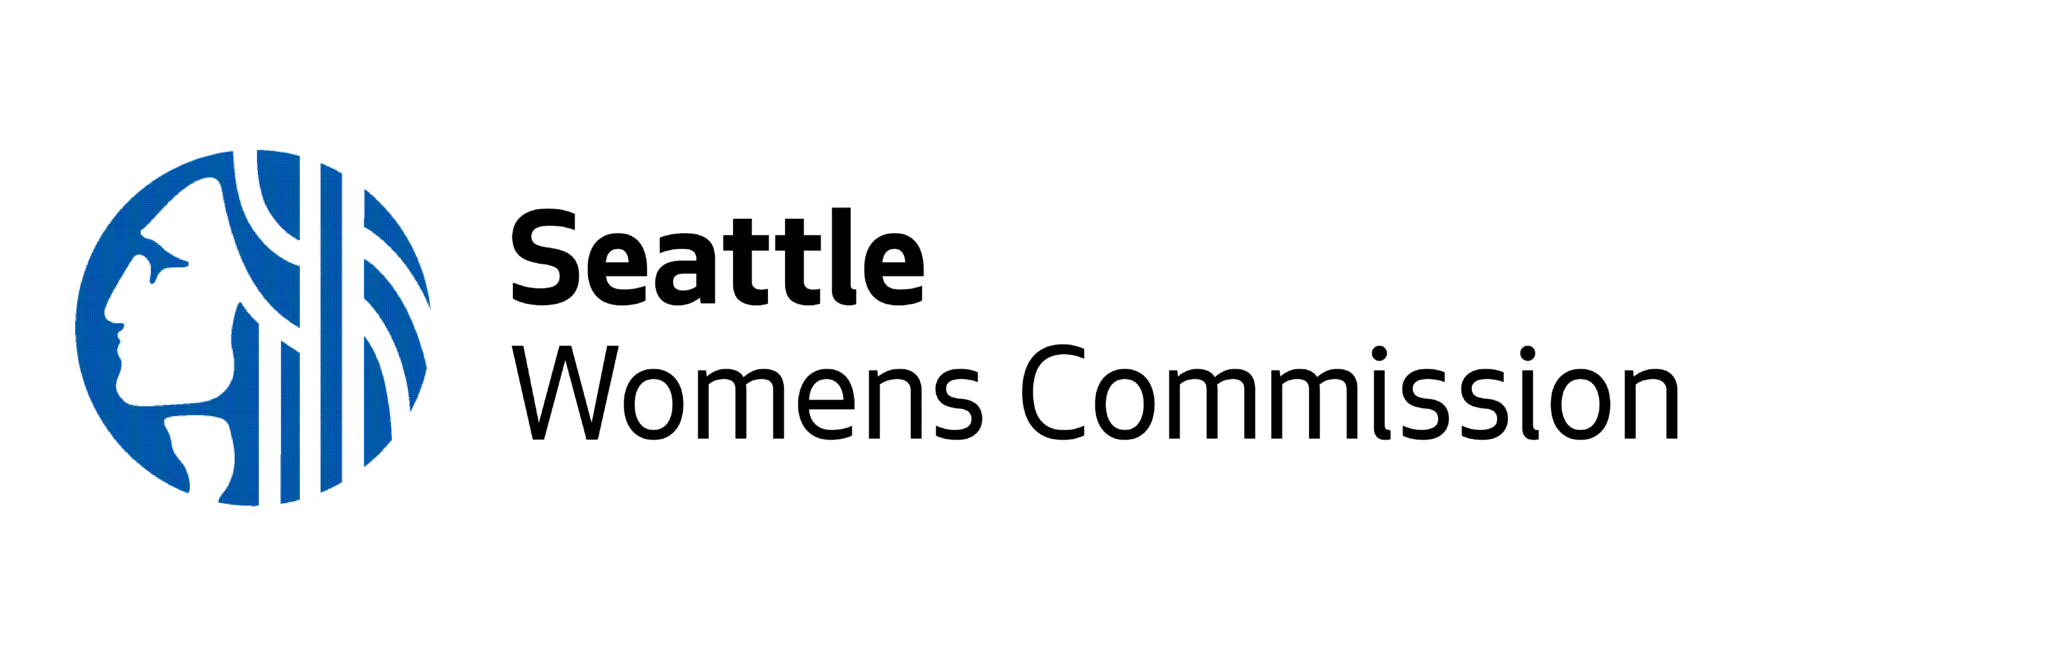 Logo for the Seattle Women's Commission